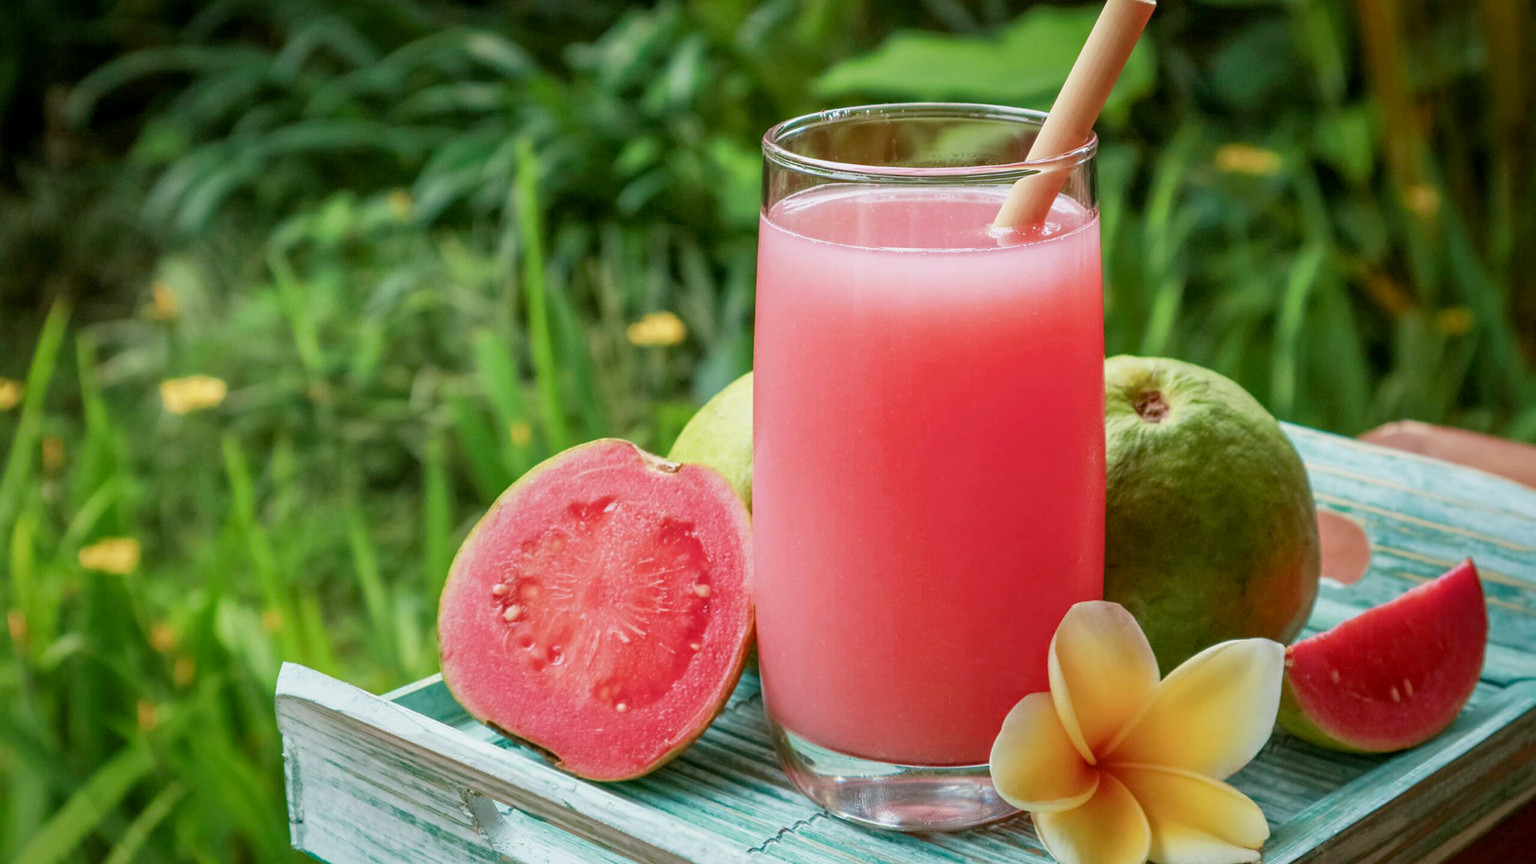 8 recipes to make guava juice drink at home